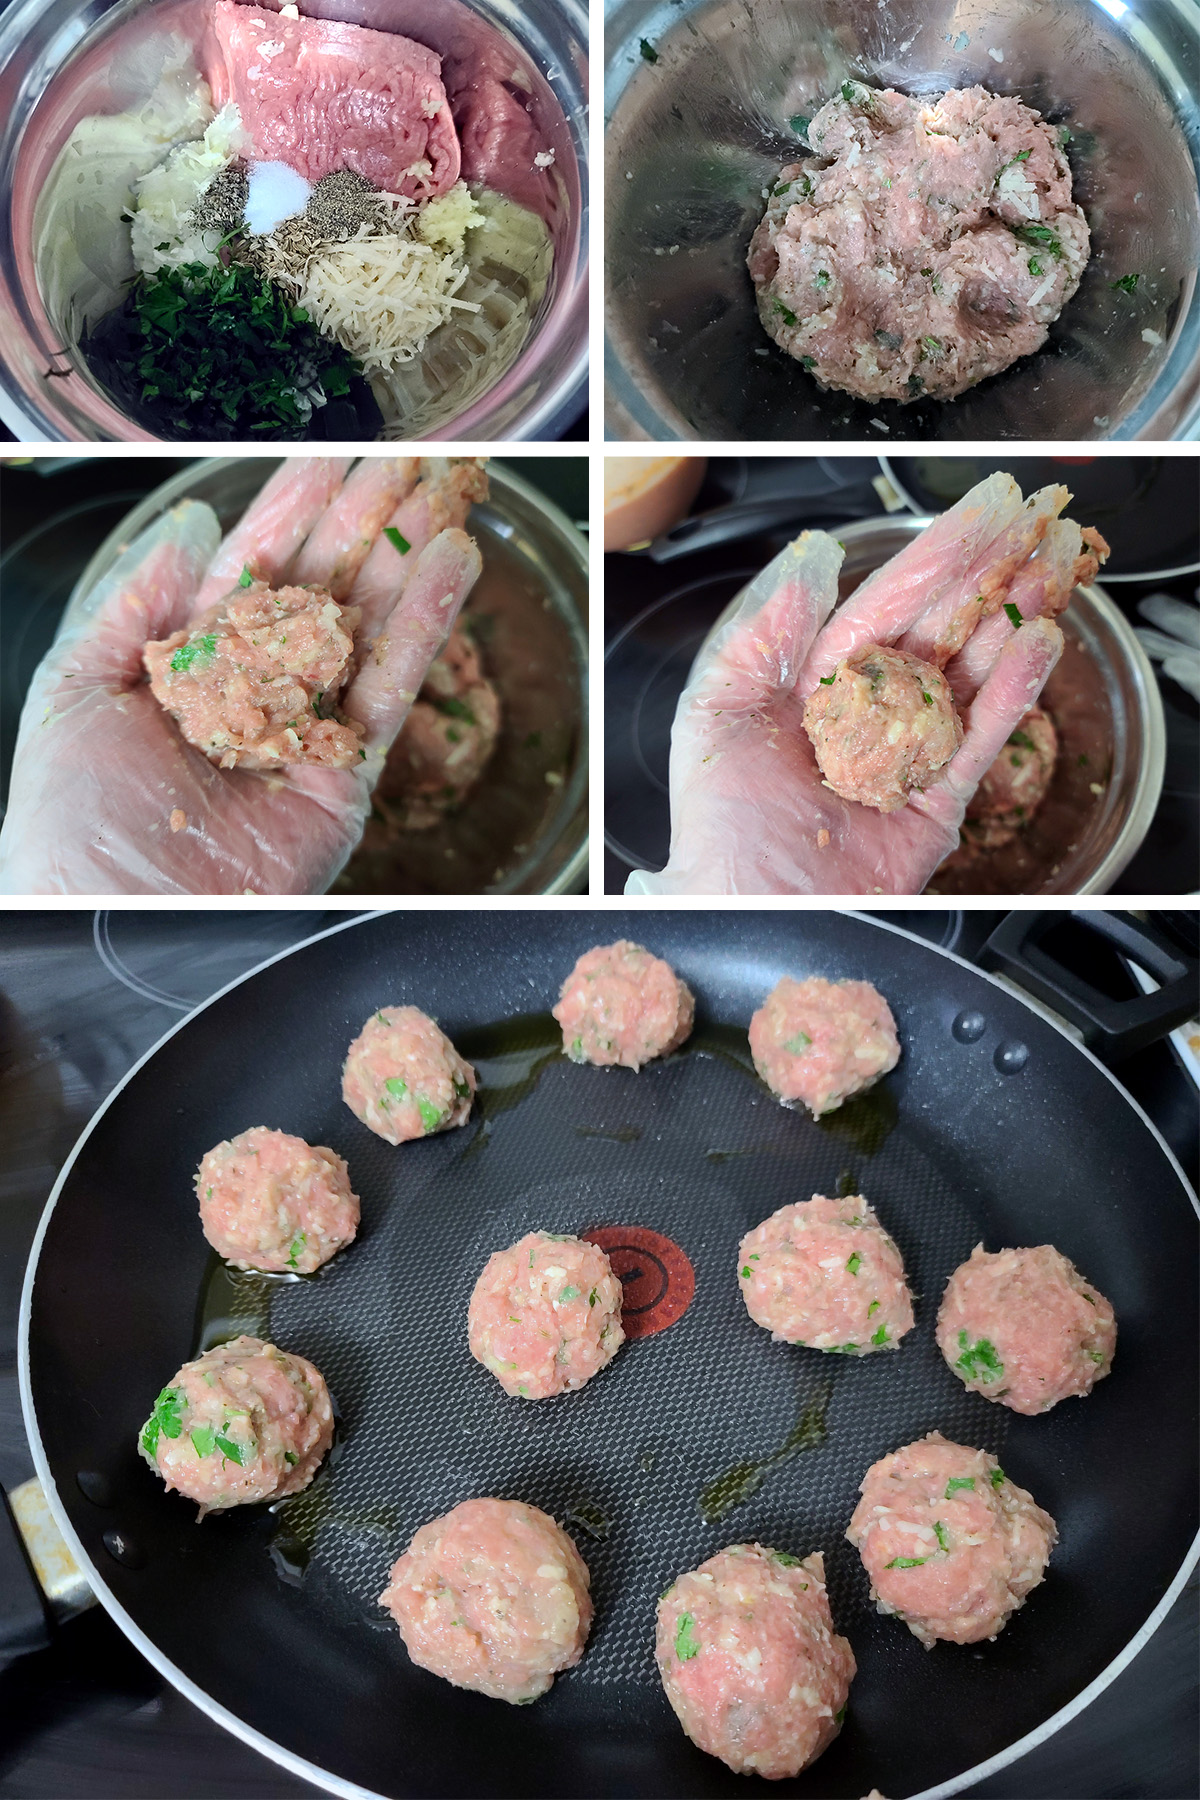 A 5 part image showing the keto meatball ingredients being mixed, formed into meatballs, and placed in a pan.